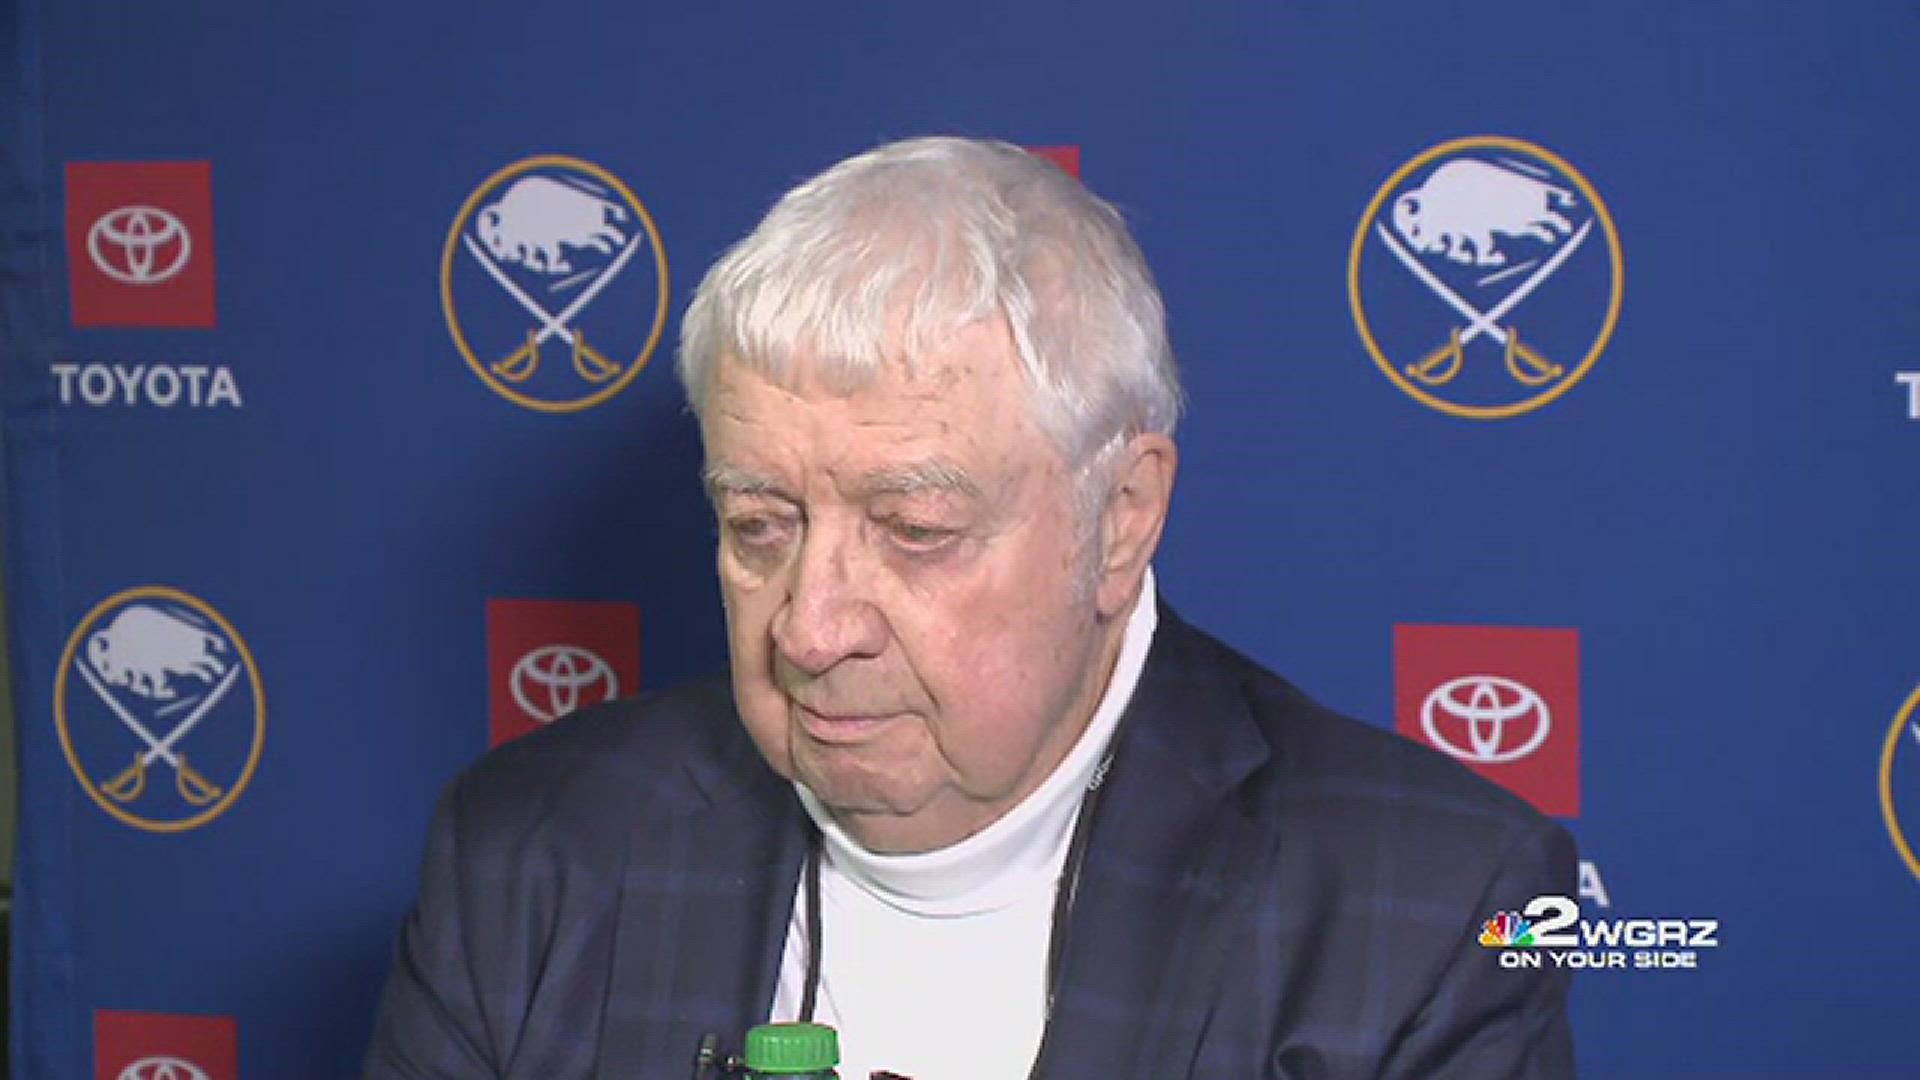 After 51 years behind the microphone, the Sabres' Rick Jeanneret saw a banner dedicated to him raised at KeyBank Center on Friday night.